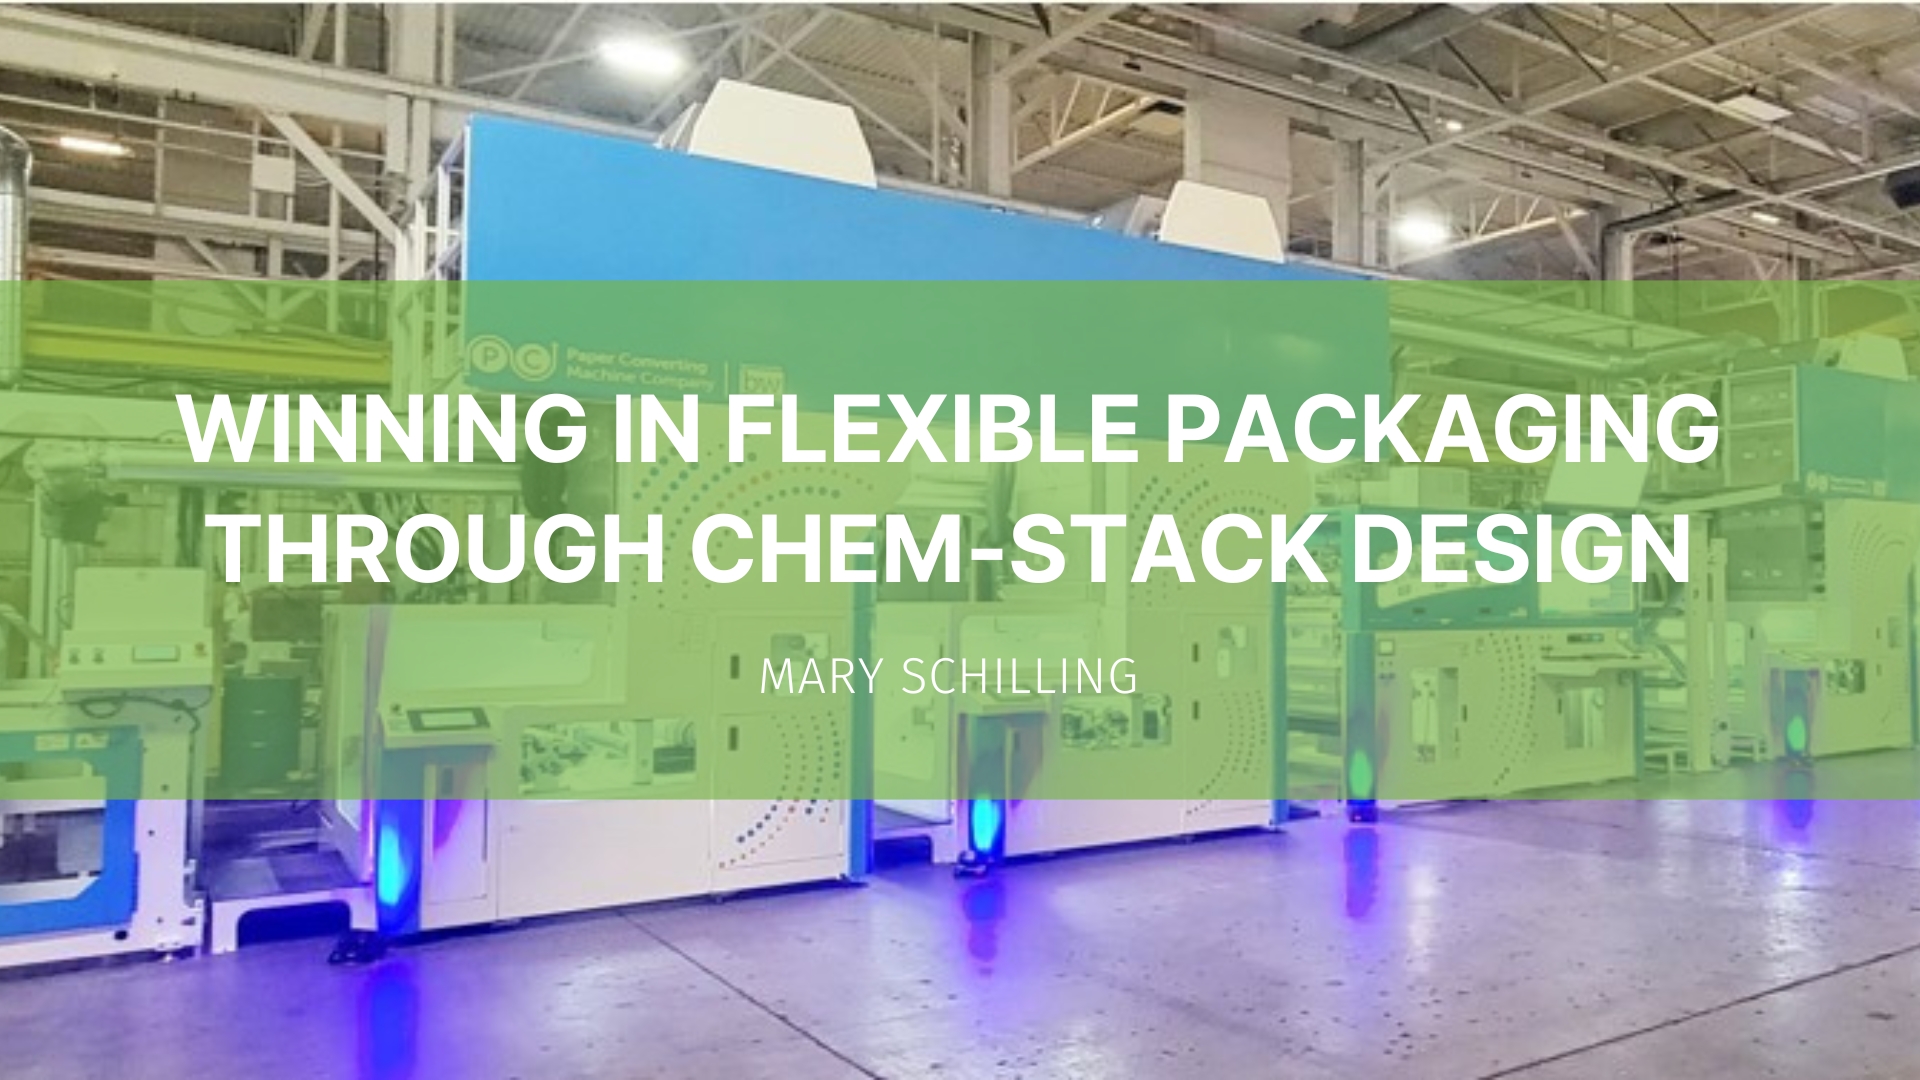 Featured image for “Winning in Flexible Packaging through Chem-Stack Design”